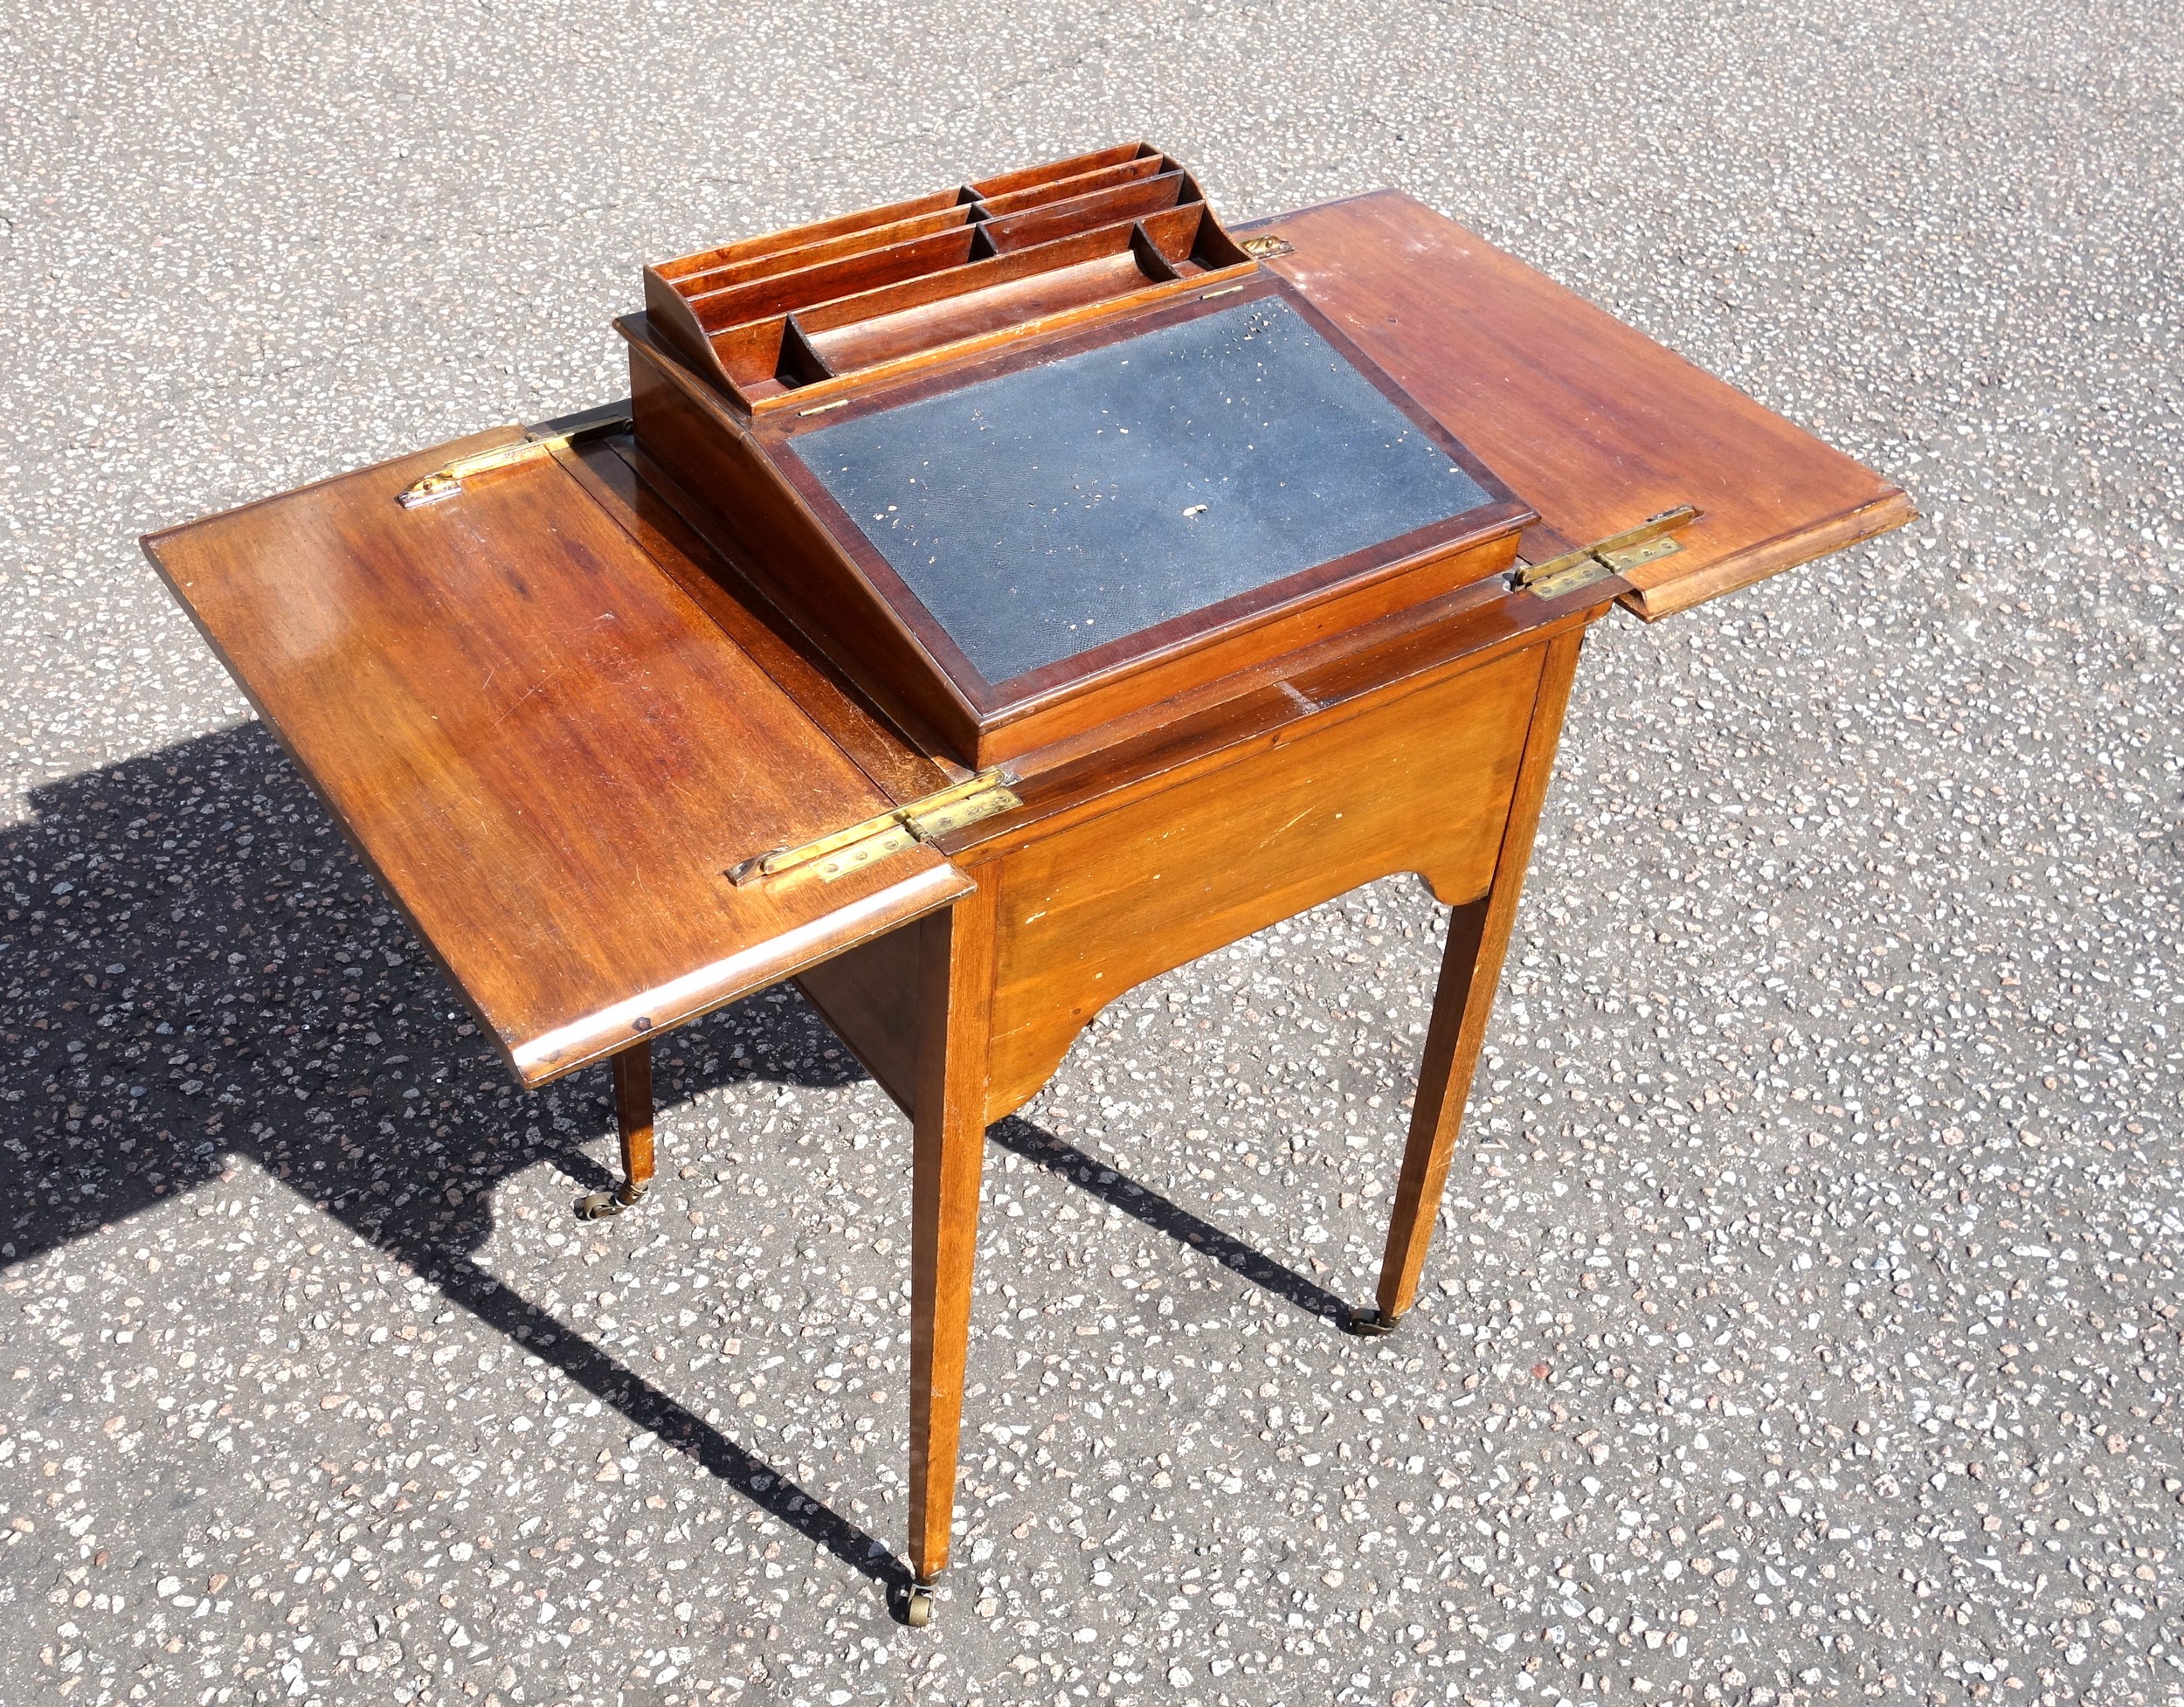 Edwardian Scottish mahogany writing table with a double hinged top raising a slope with pen tray,